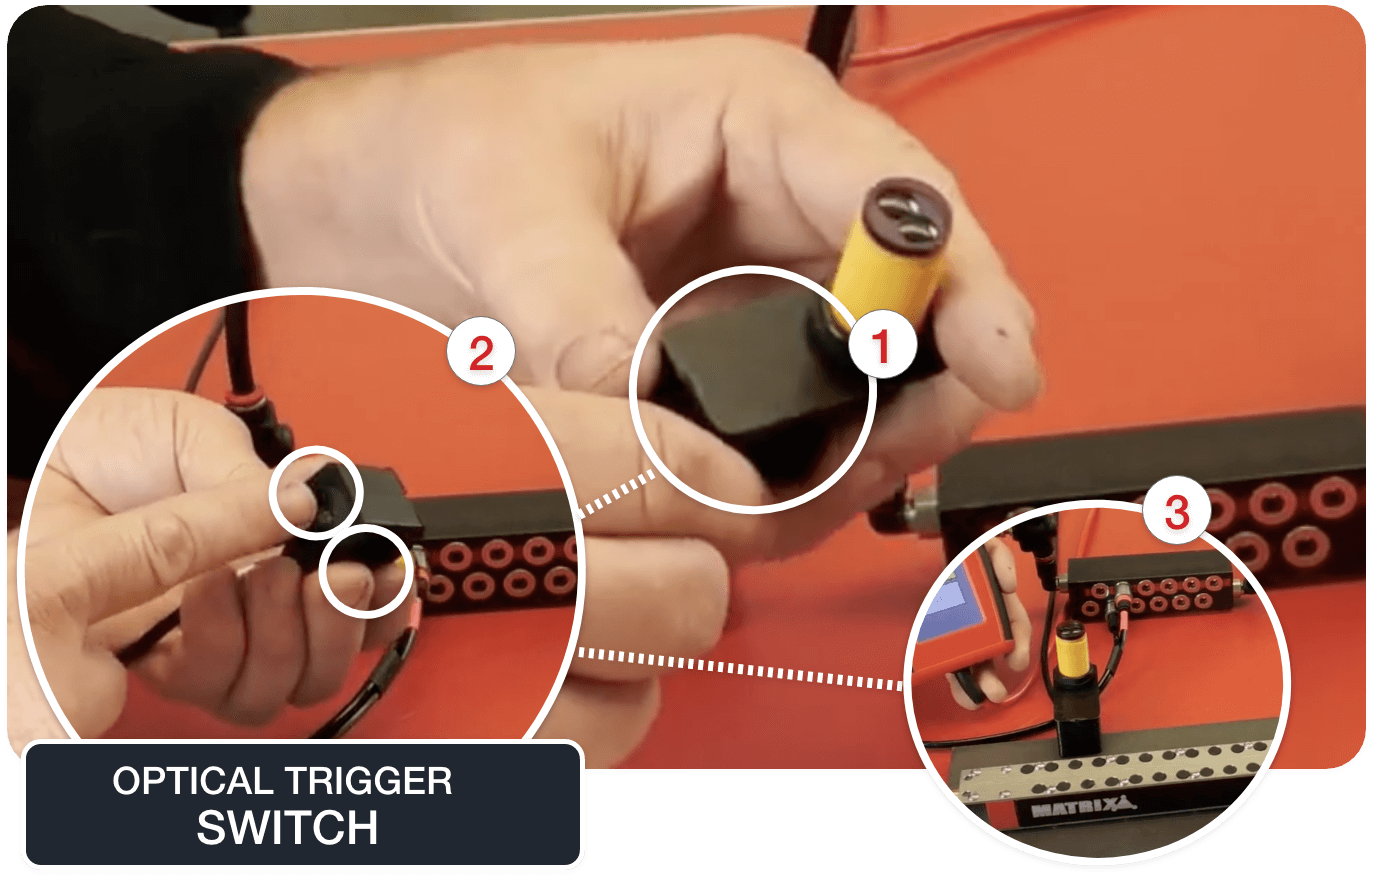 Optical trigger switch